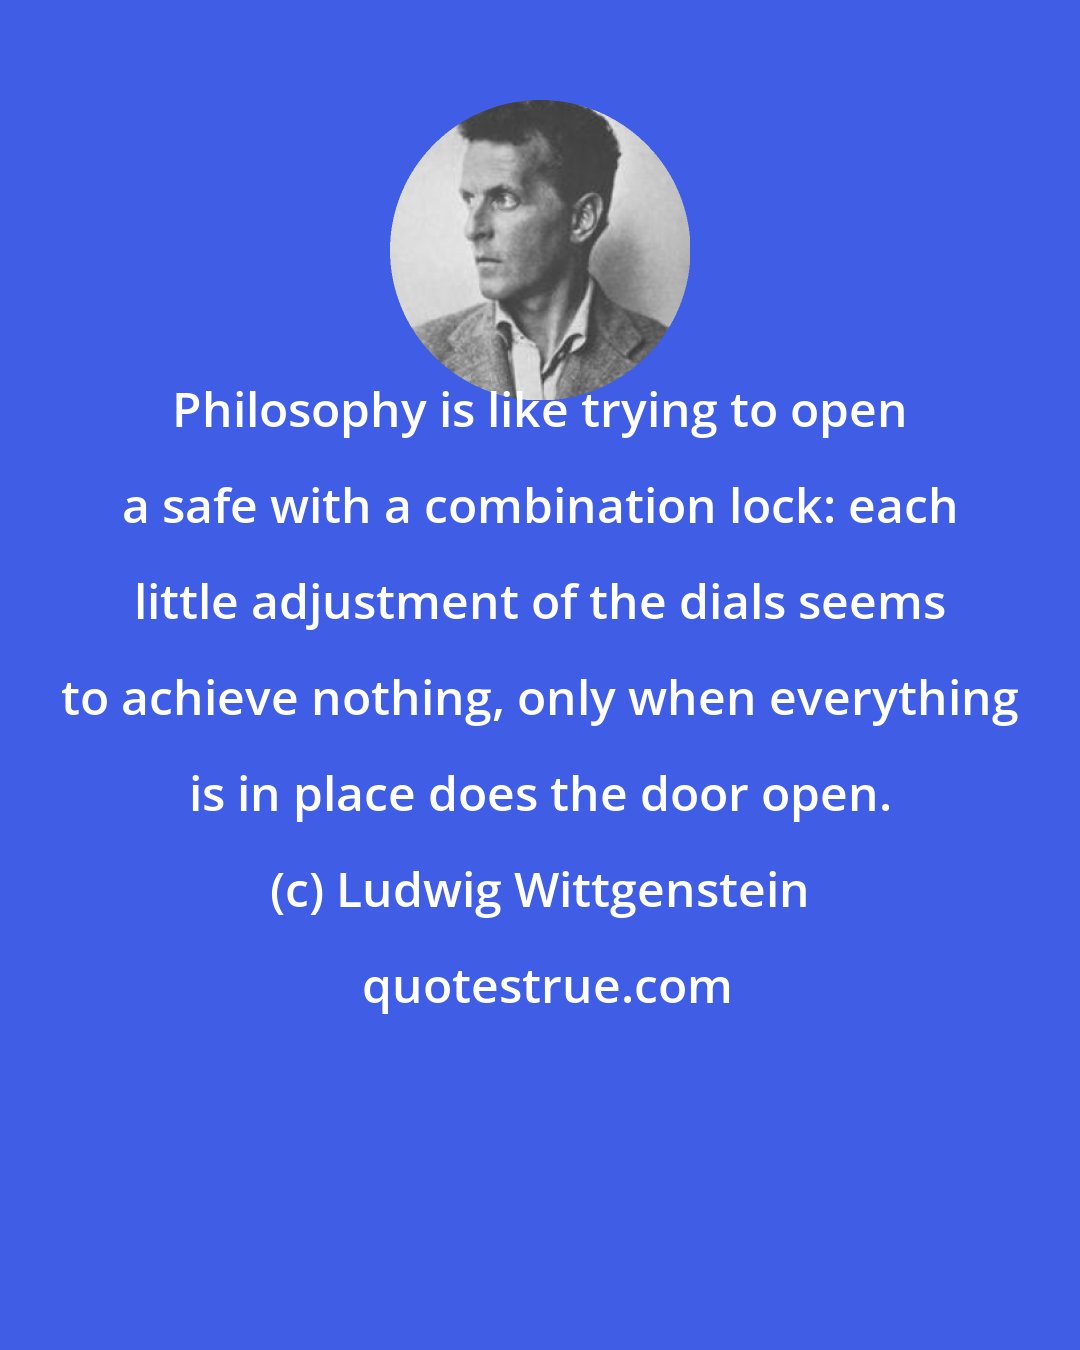 Ludwig Wittgenstein: Philosophy is like trying to open a safe with a combination lock: each little adjustment of the dials seems to achieve nothing, only when everything is in place does the door open.